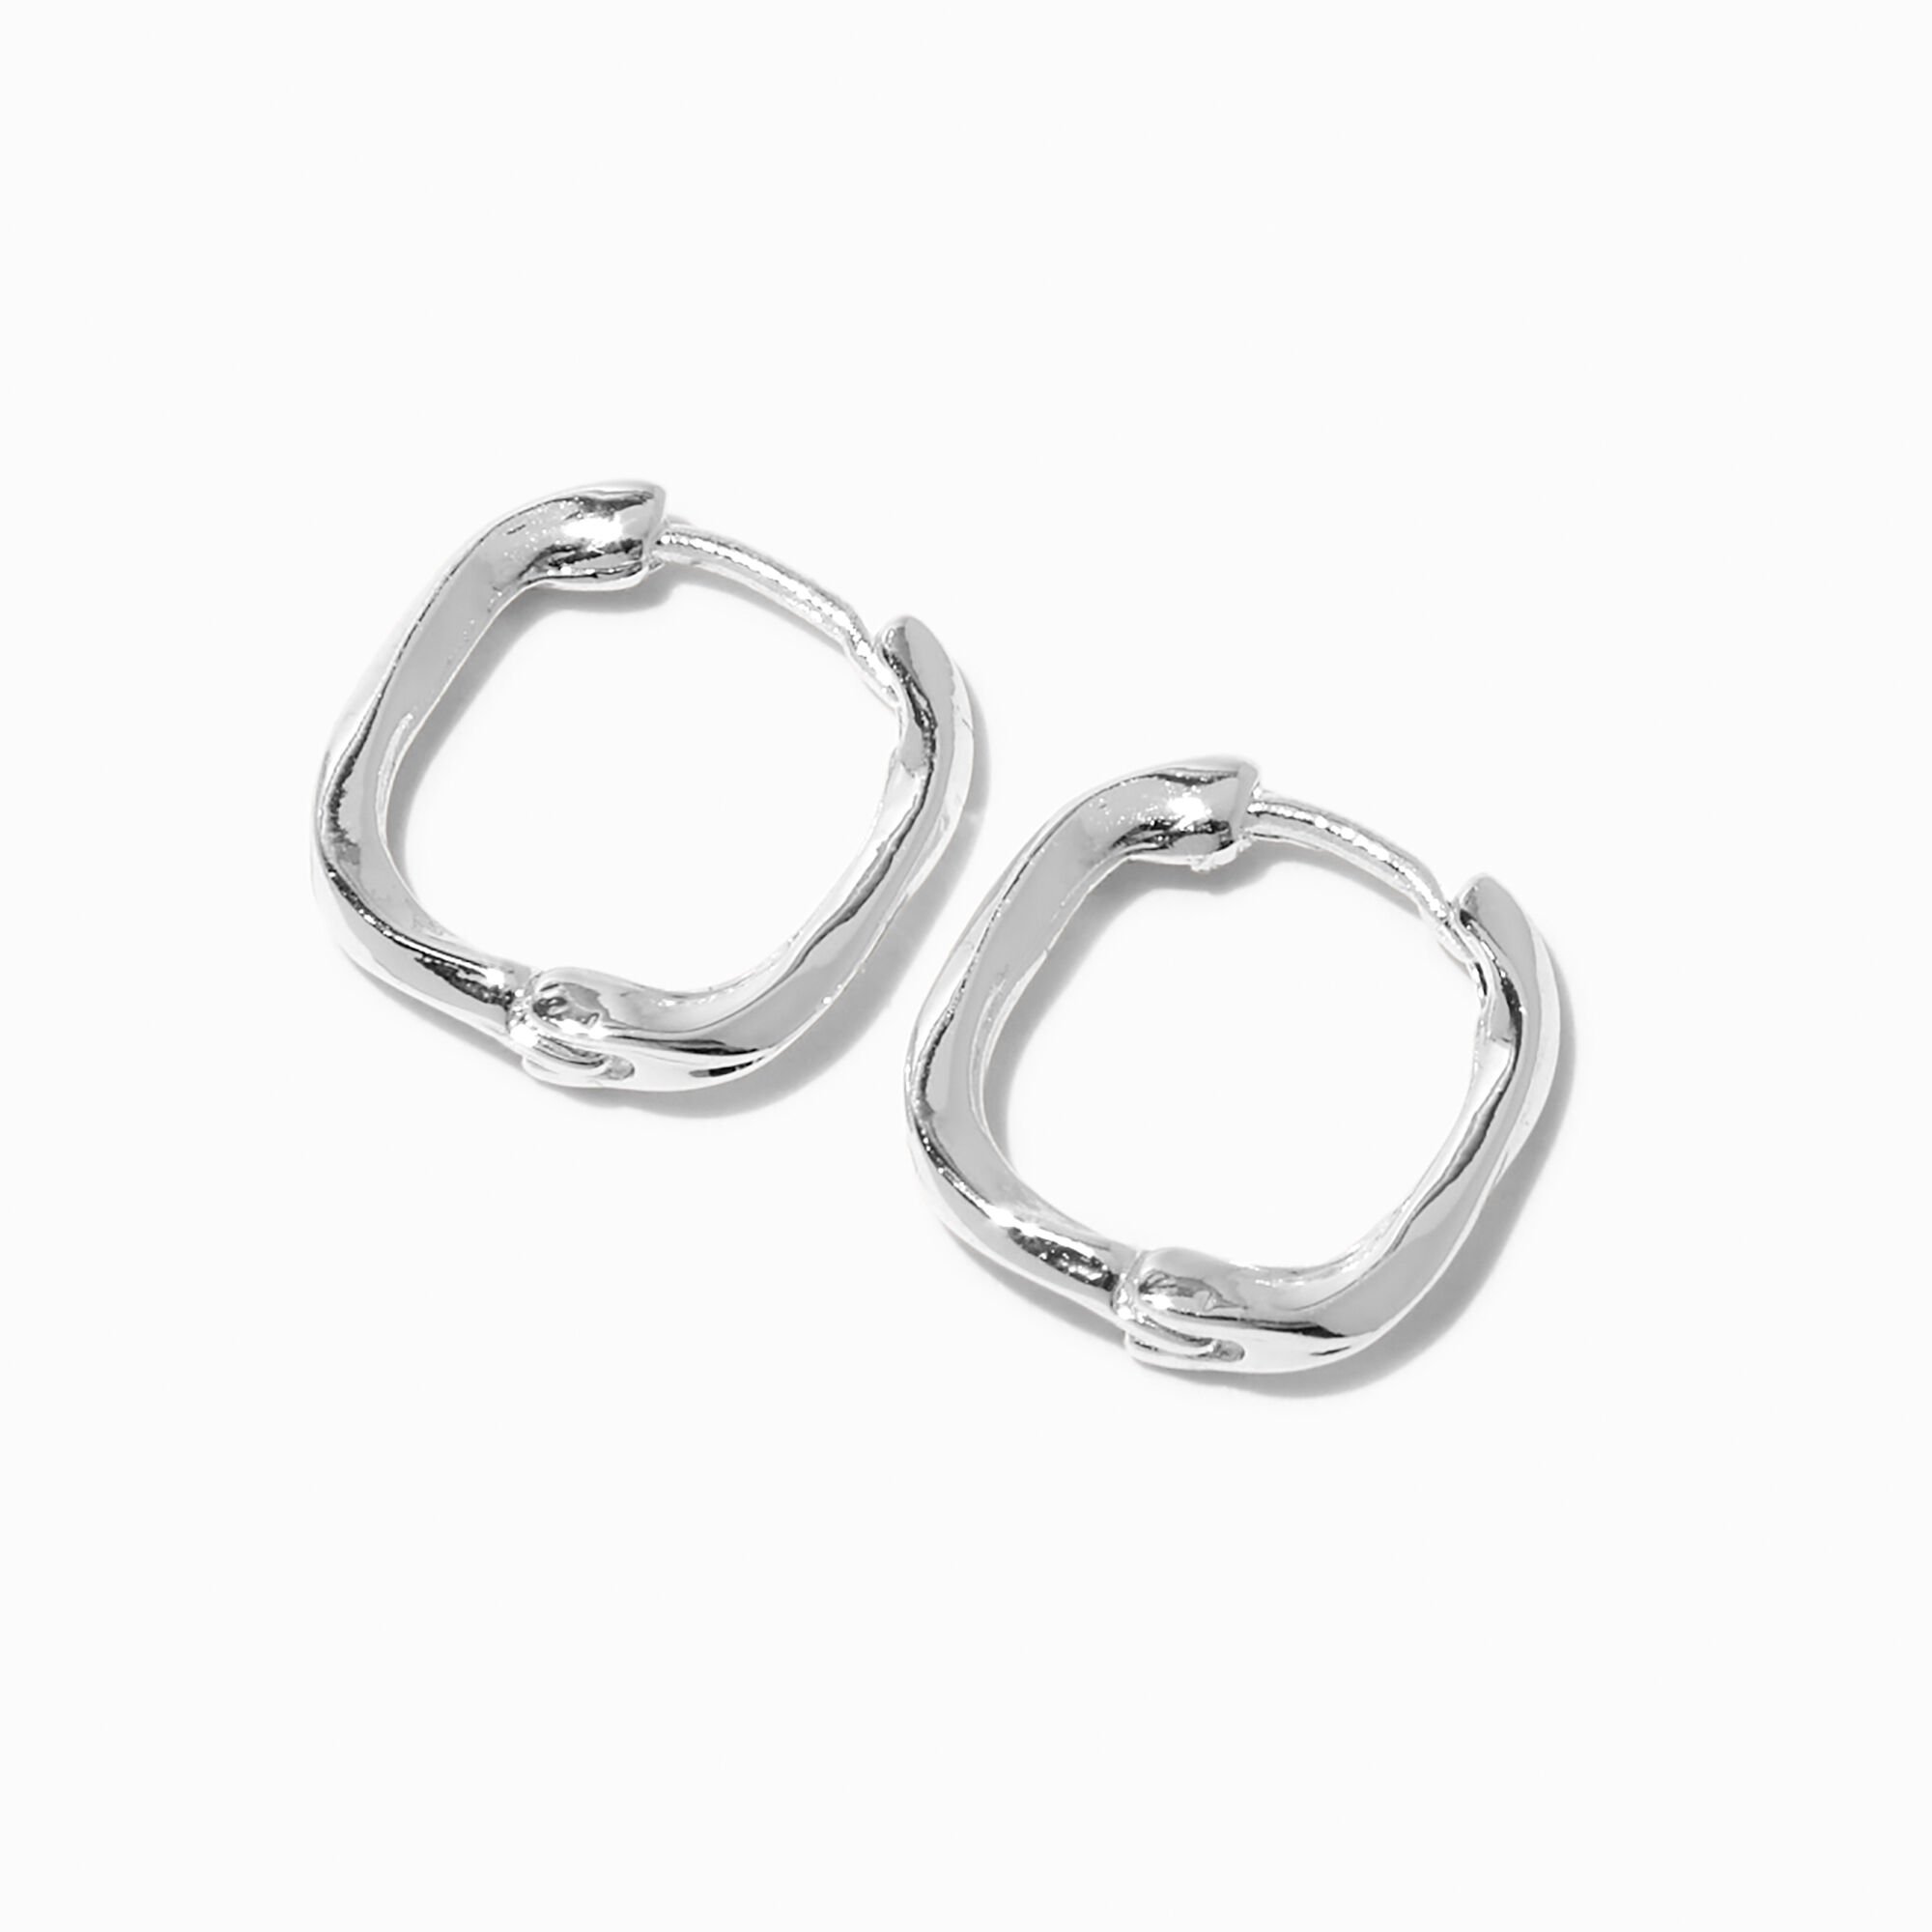 View Claires Tone Molten 15MM Huggie Hoop Earrings Silver information